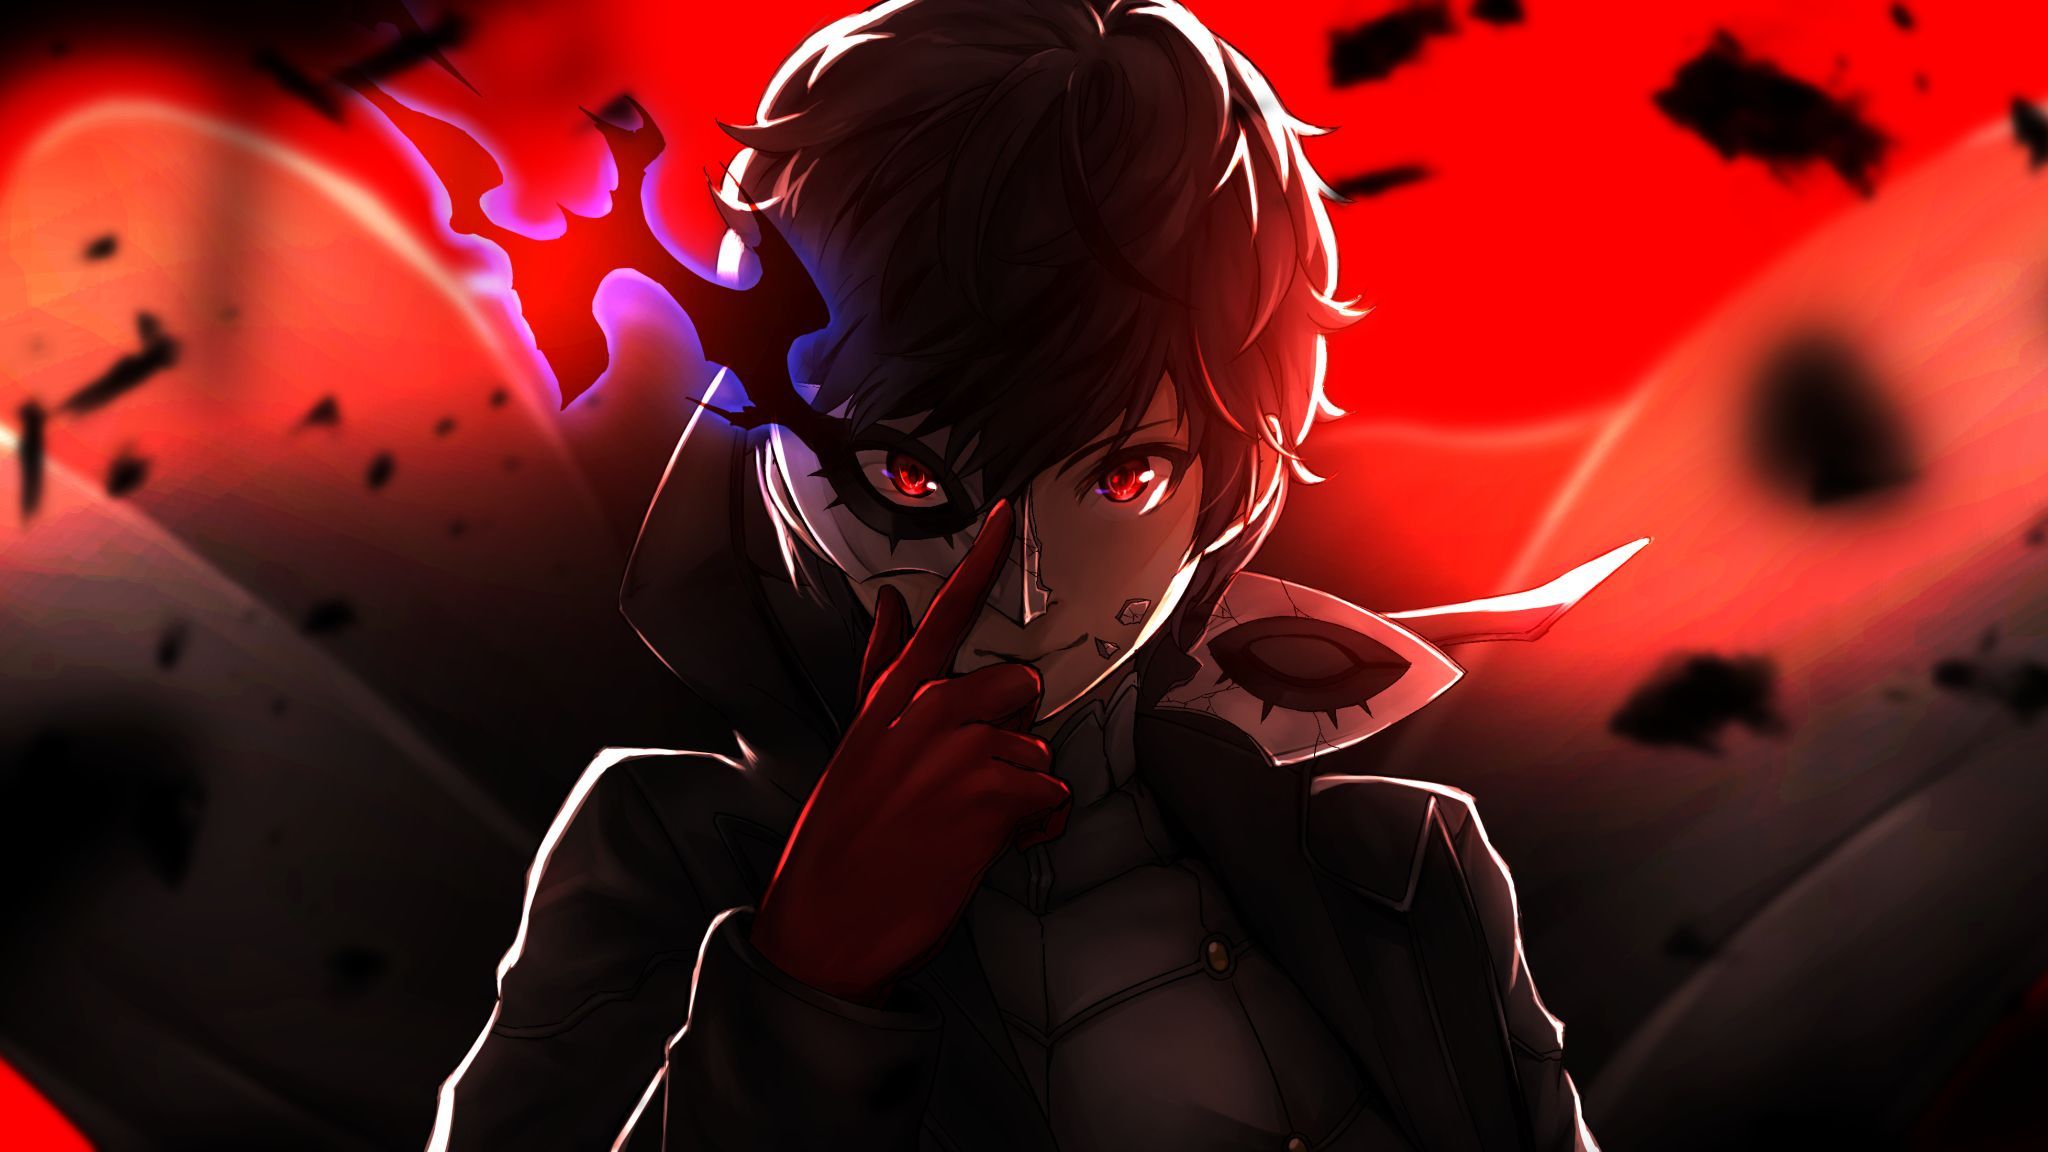 Joker from Persona 5 in a red and black suit with a red eye - 2048x1152